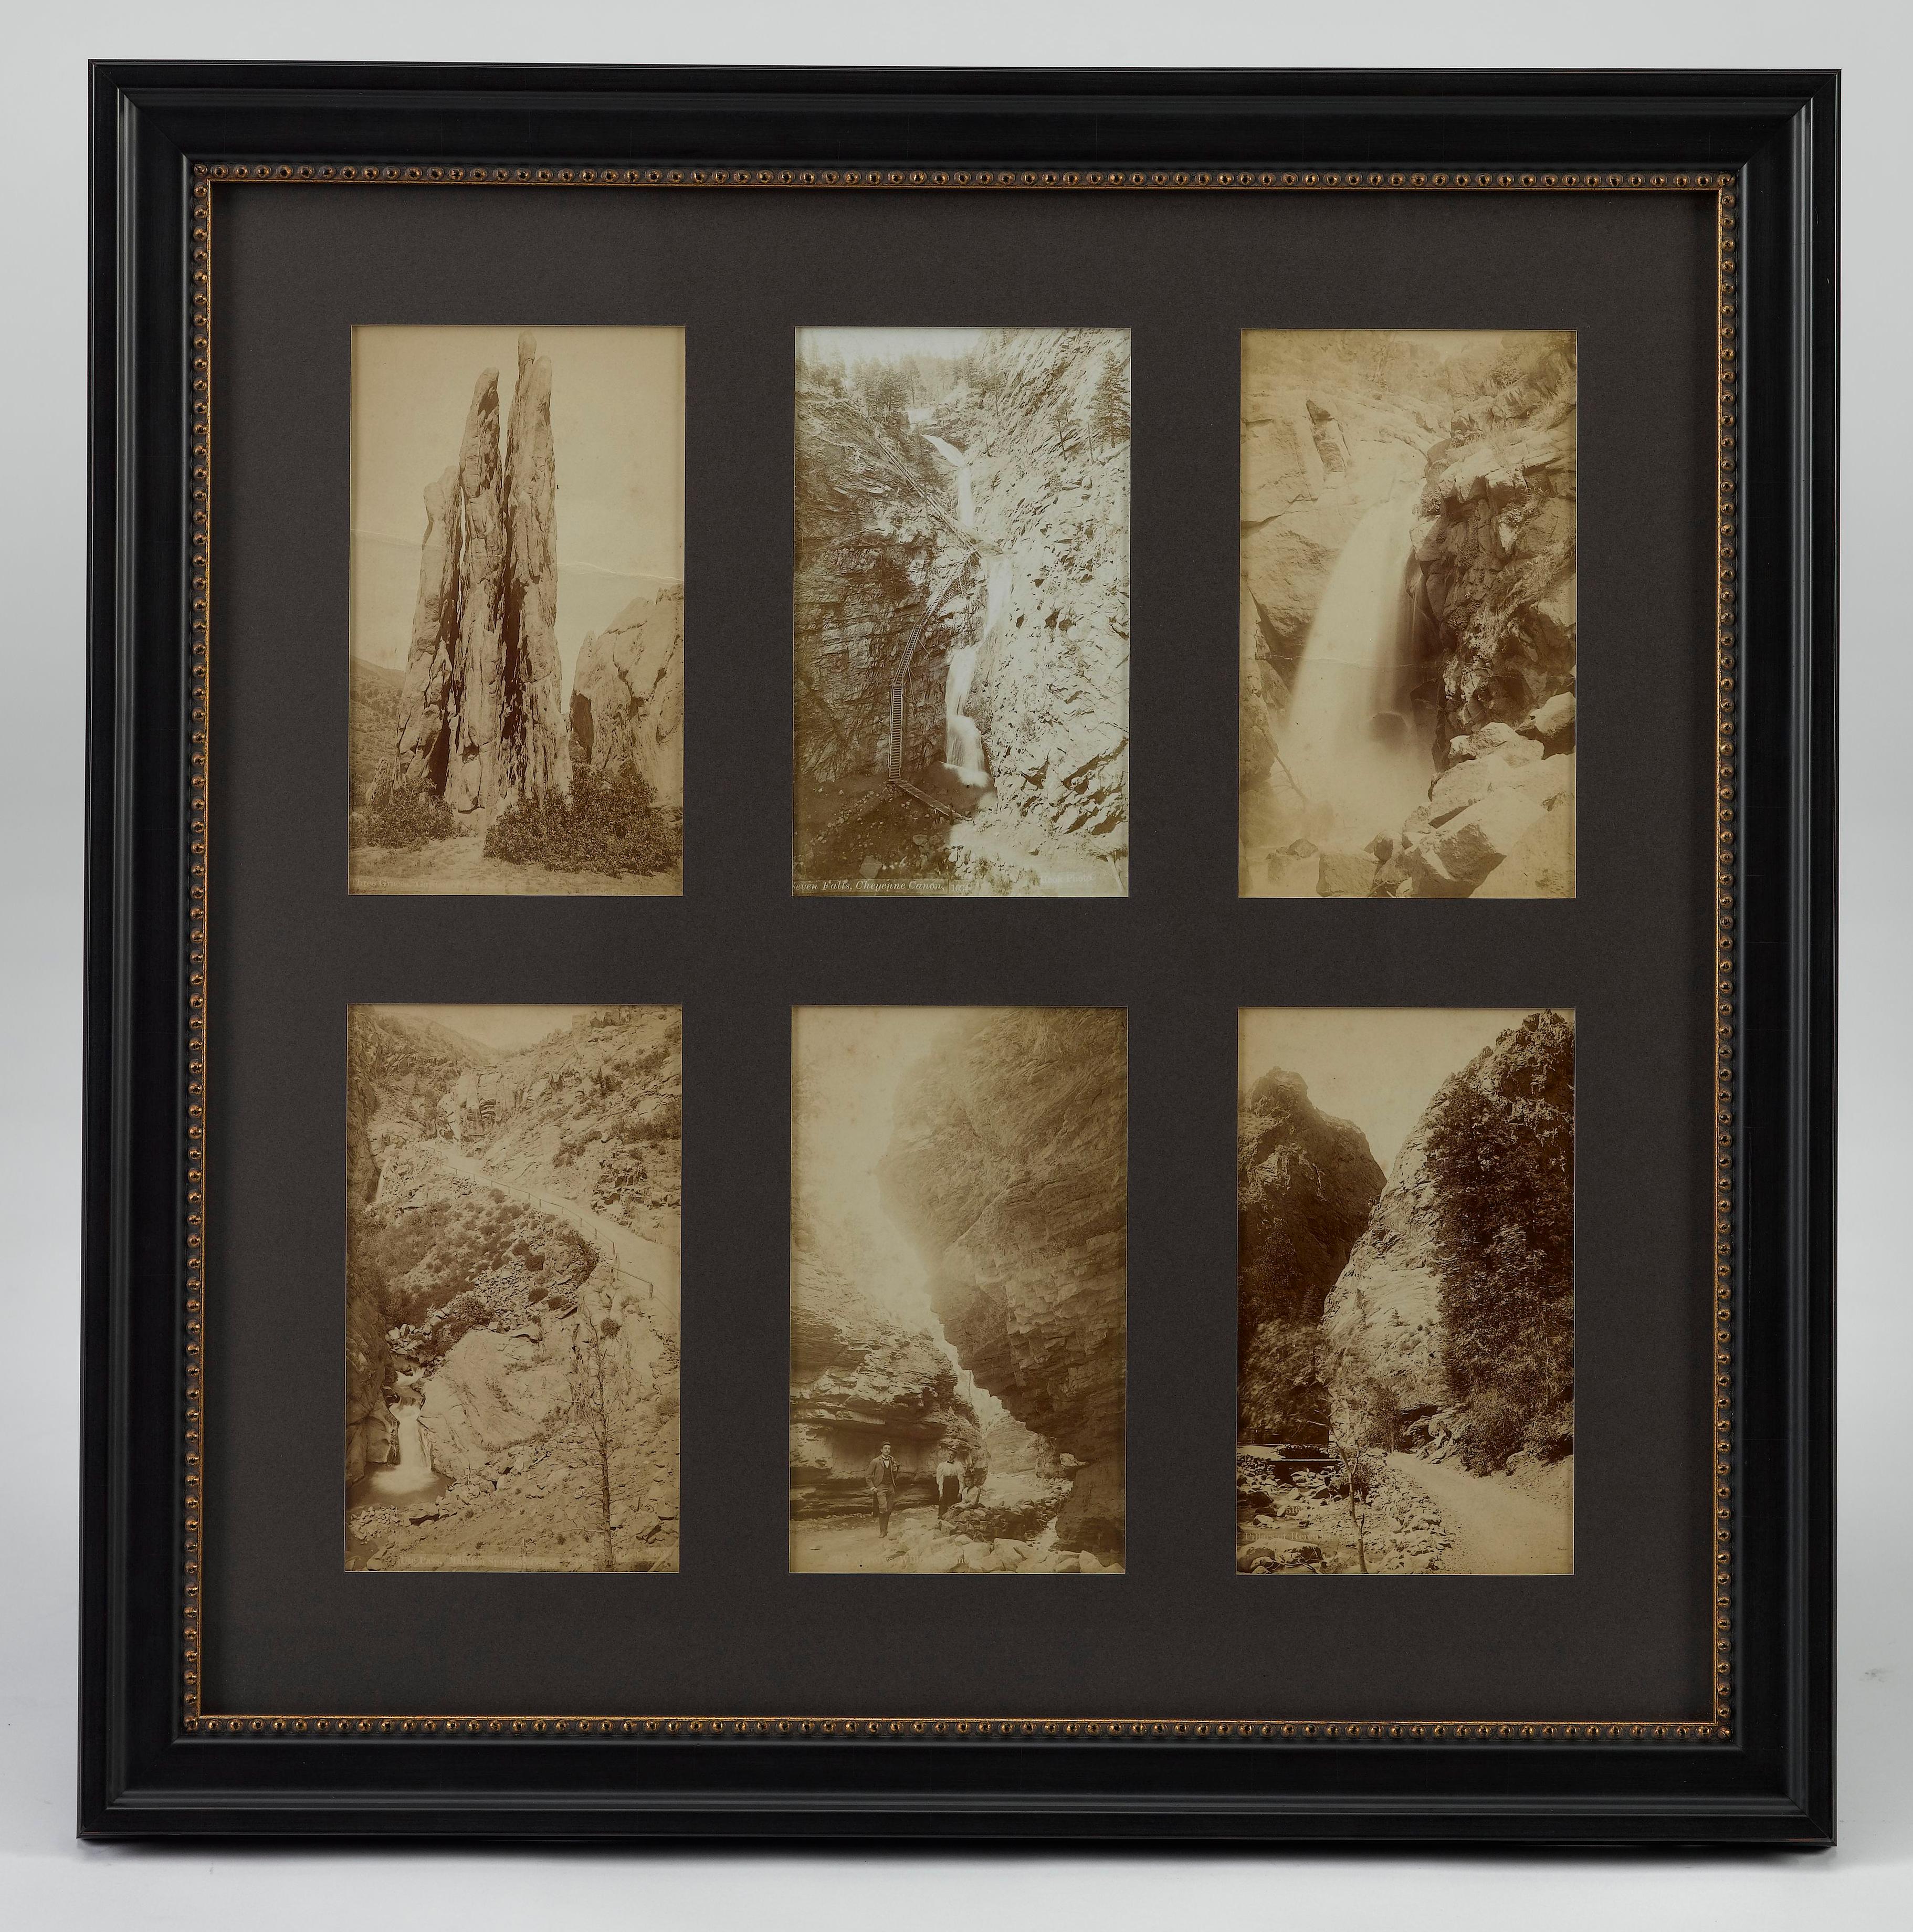 Presented is a collage of six vintage cabinet card photographs of Colorado Springs and its surrounding areas, dating to the 1890s. The sepia toned photographs were published by W.E. Hook View, Stationery and Book Company. The photographs capture